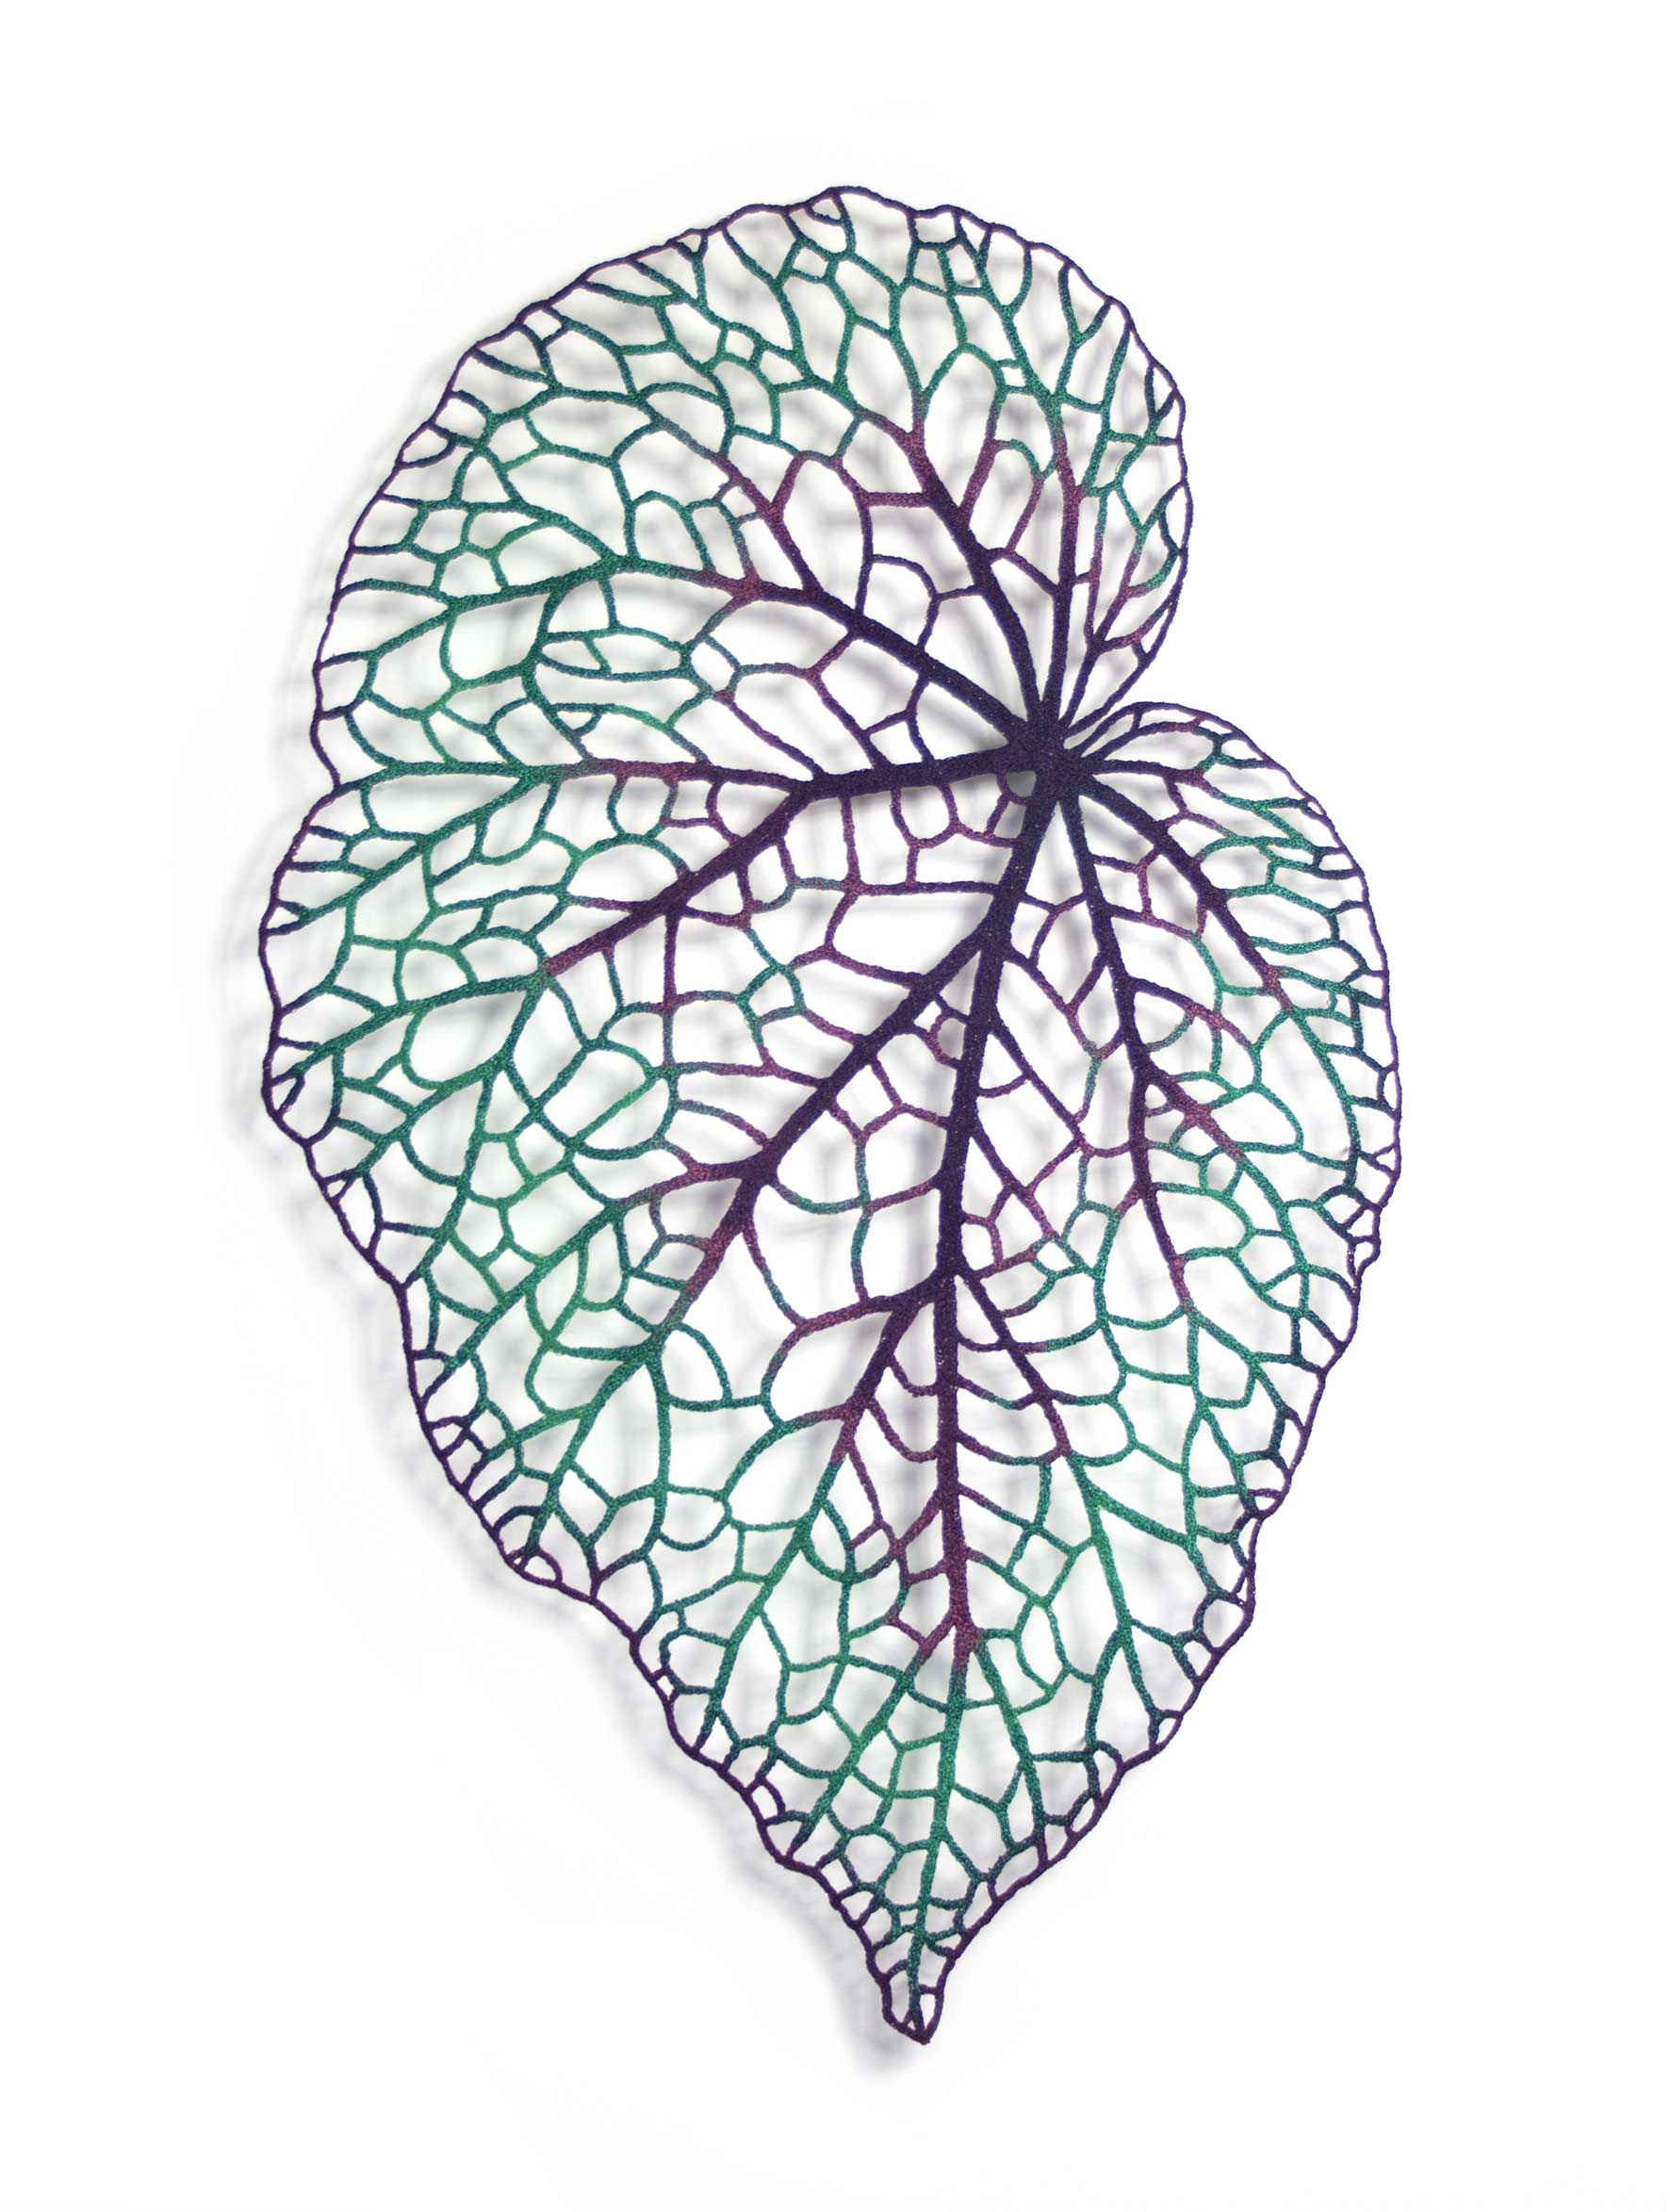 meredith woolnough feuille